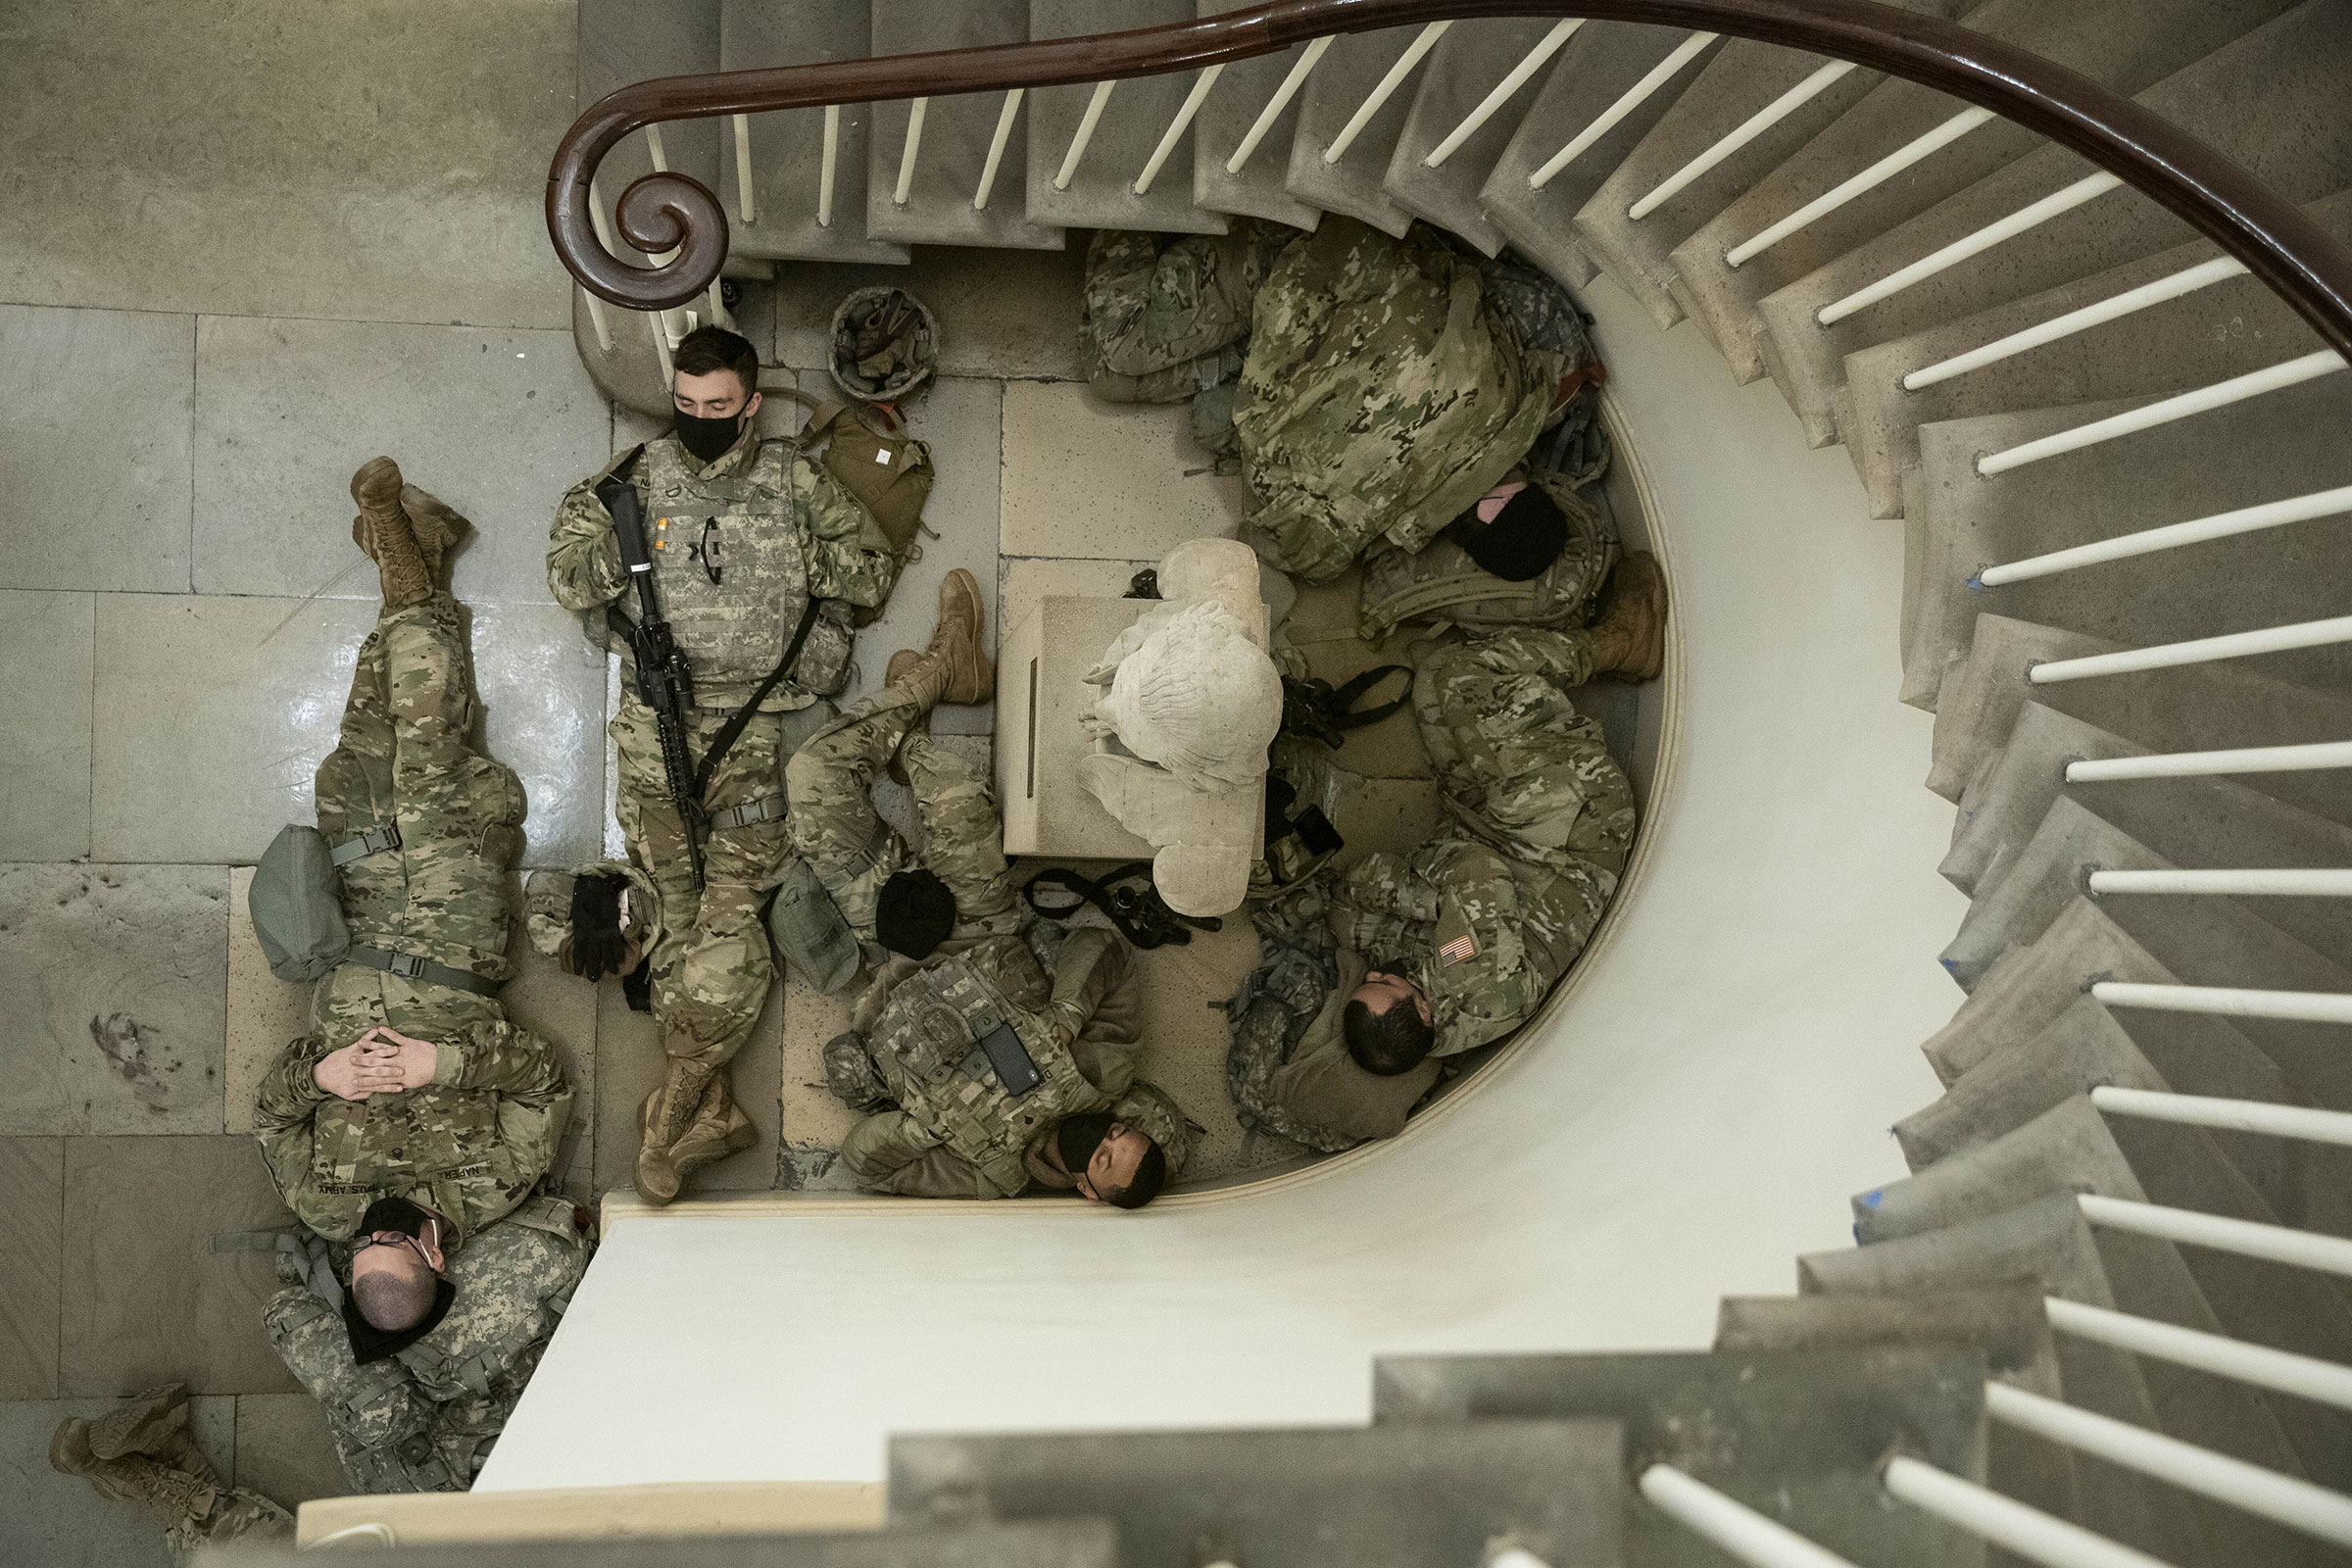 Members of the National Guard rest in a hallway of the Capitol building in Washington, on Jan. 13, 2021. (Sarah Silbiger—Bloomberg/Getty Images)